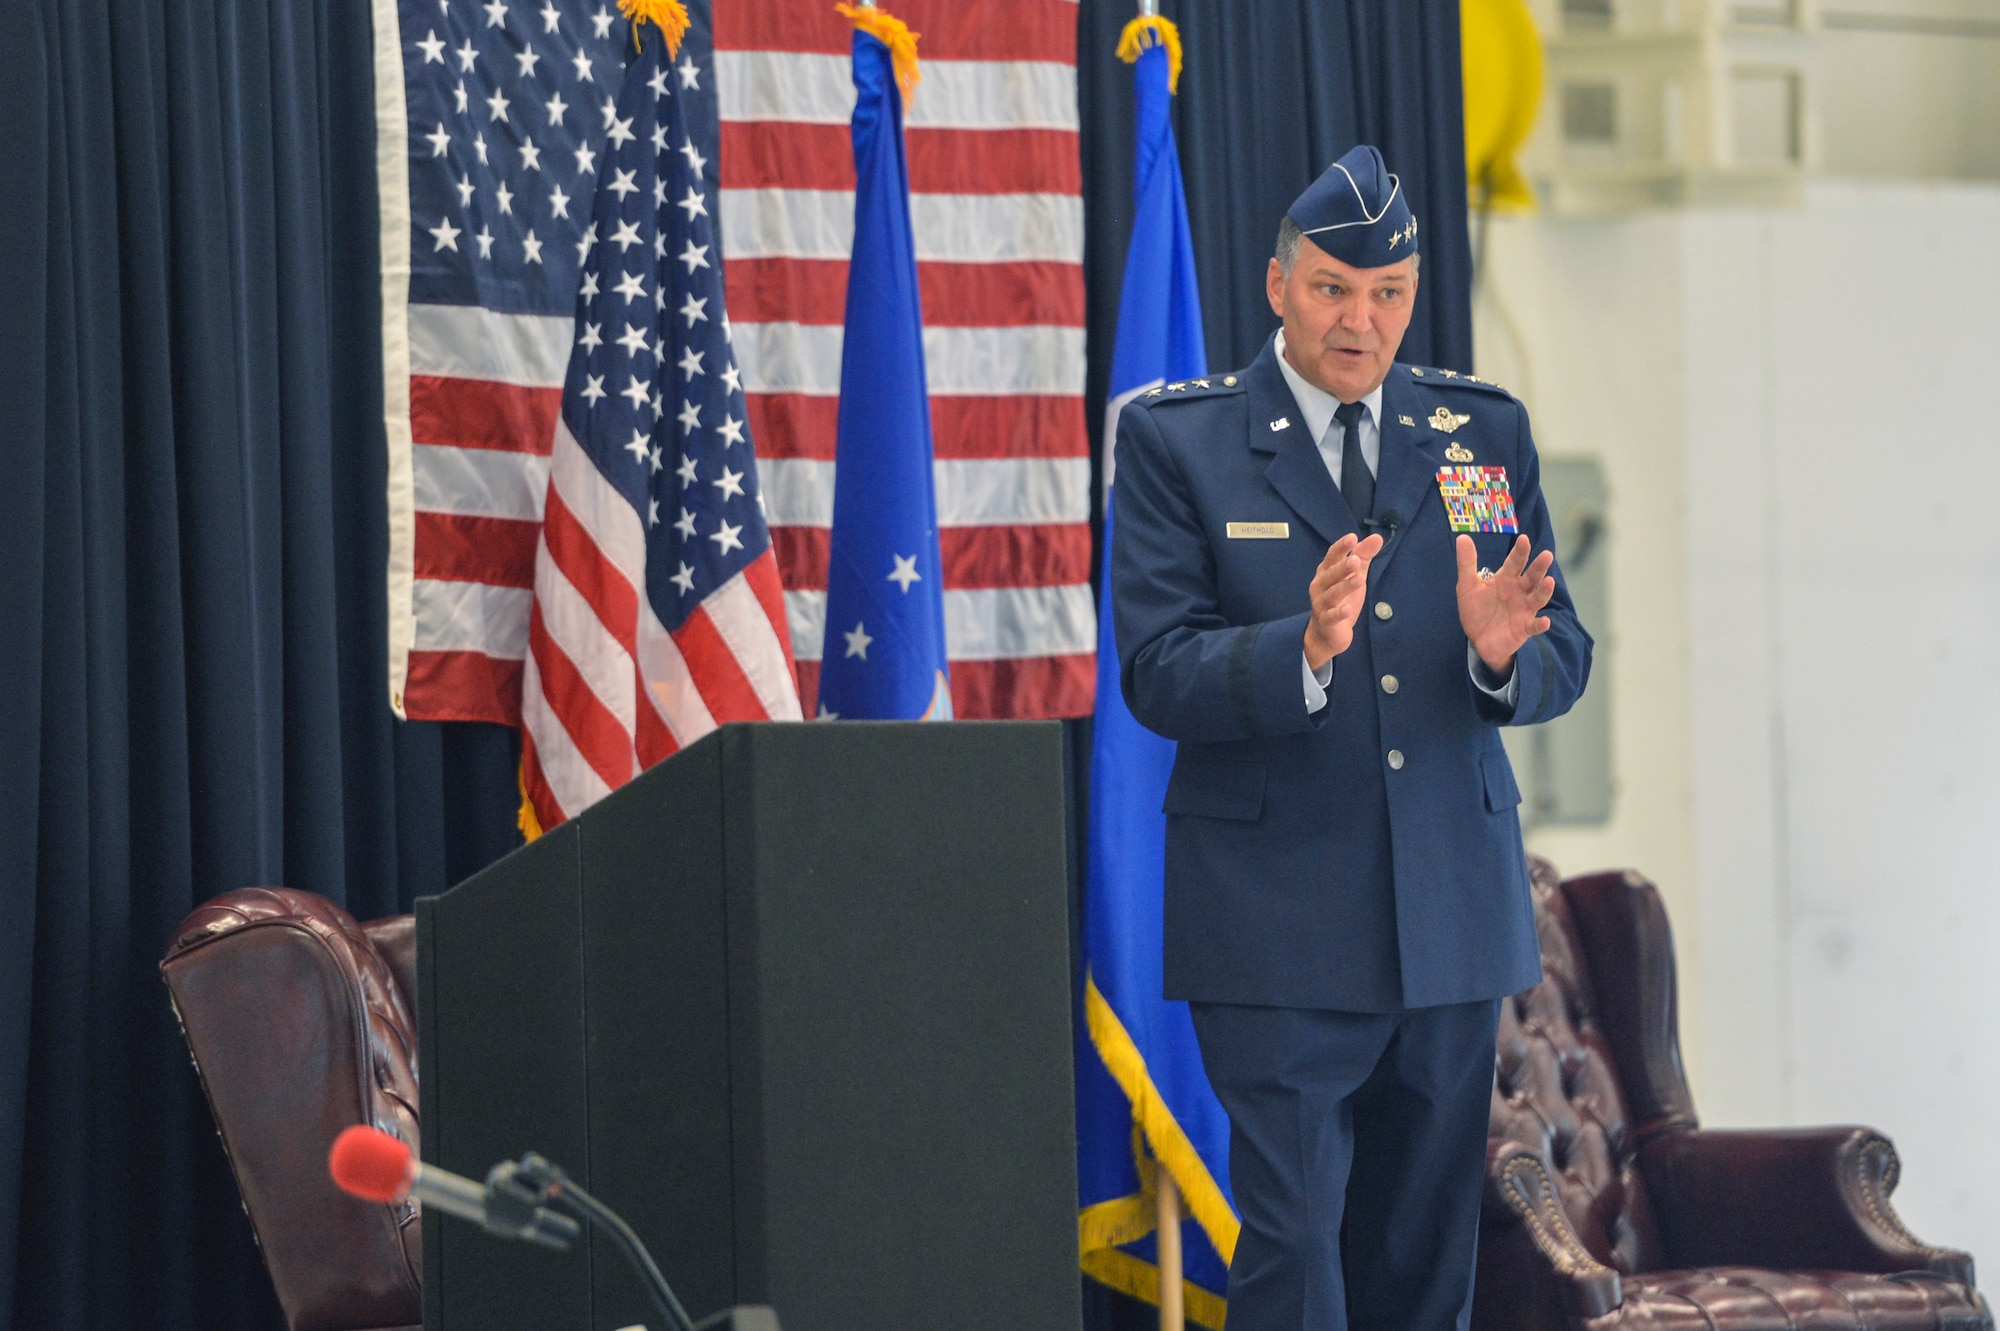 Lt. Gen. Bradley Heithold, Air Force Special Operations Command commander delivers his opening remarks Aug. 18, 2014, to audience members attending the 22nd STS awards ceremony at Joint Base Lewis-McChord, Wash. AFSOC provides Air Force special operations forces for worldwide deployment and assignment to unified combatant commanders. (U.S. Air Force photo/Staff Sgt. Russ Jackson)